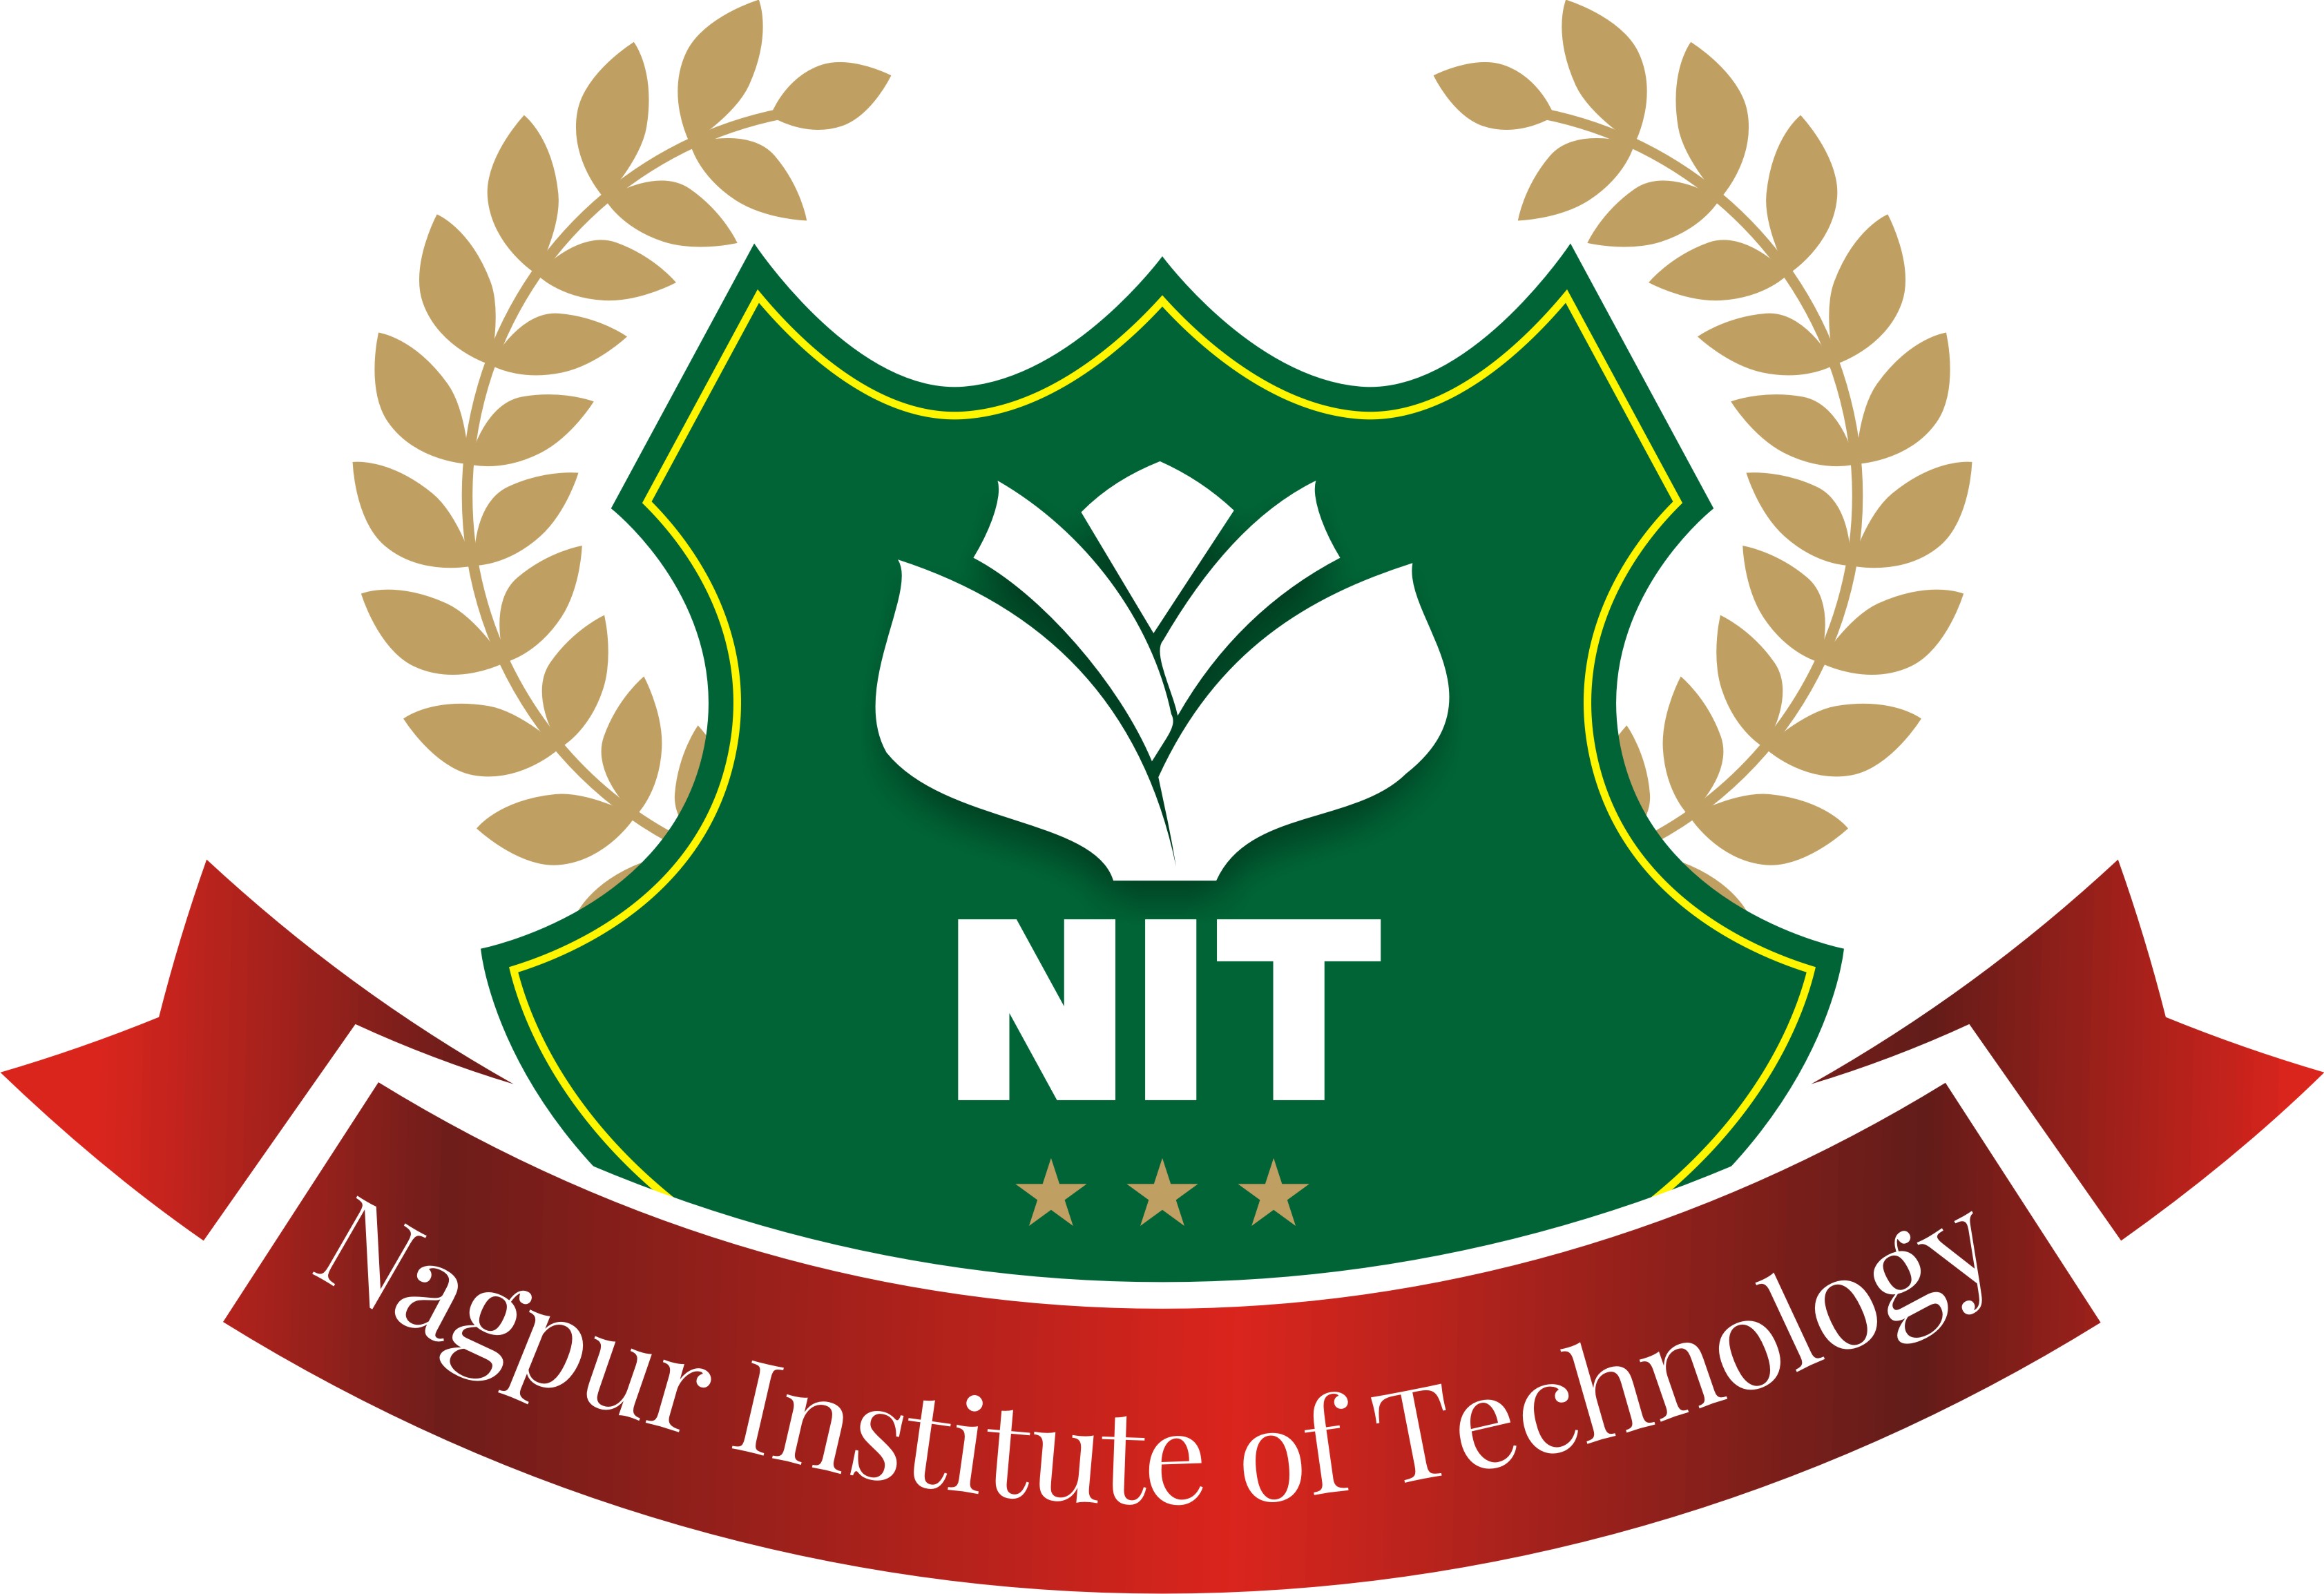 NAGPUR INSTITUTE OF TECHNOLOGY